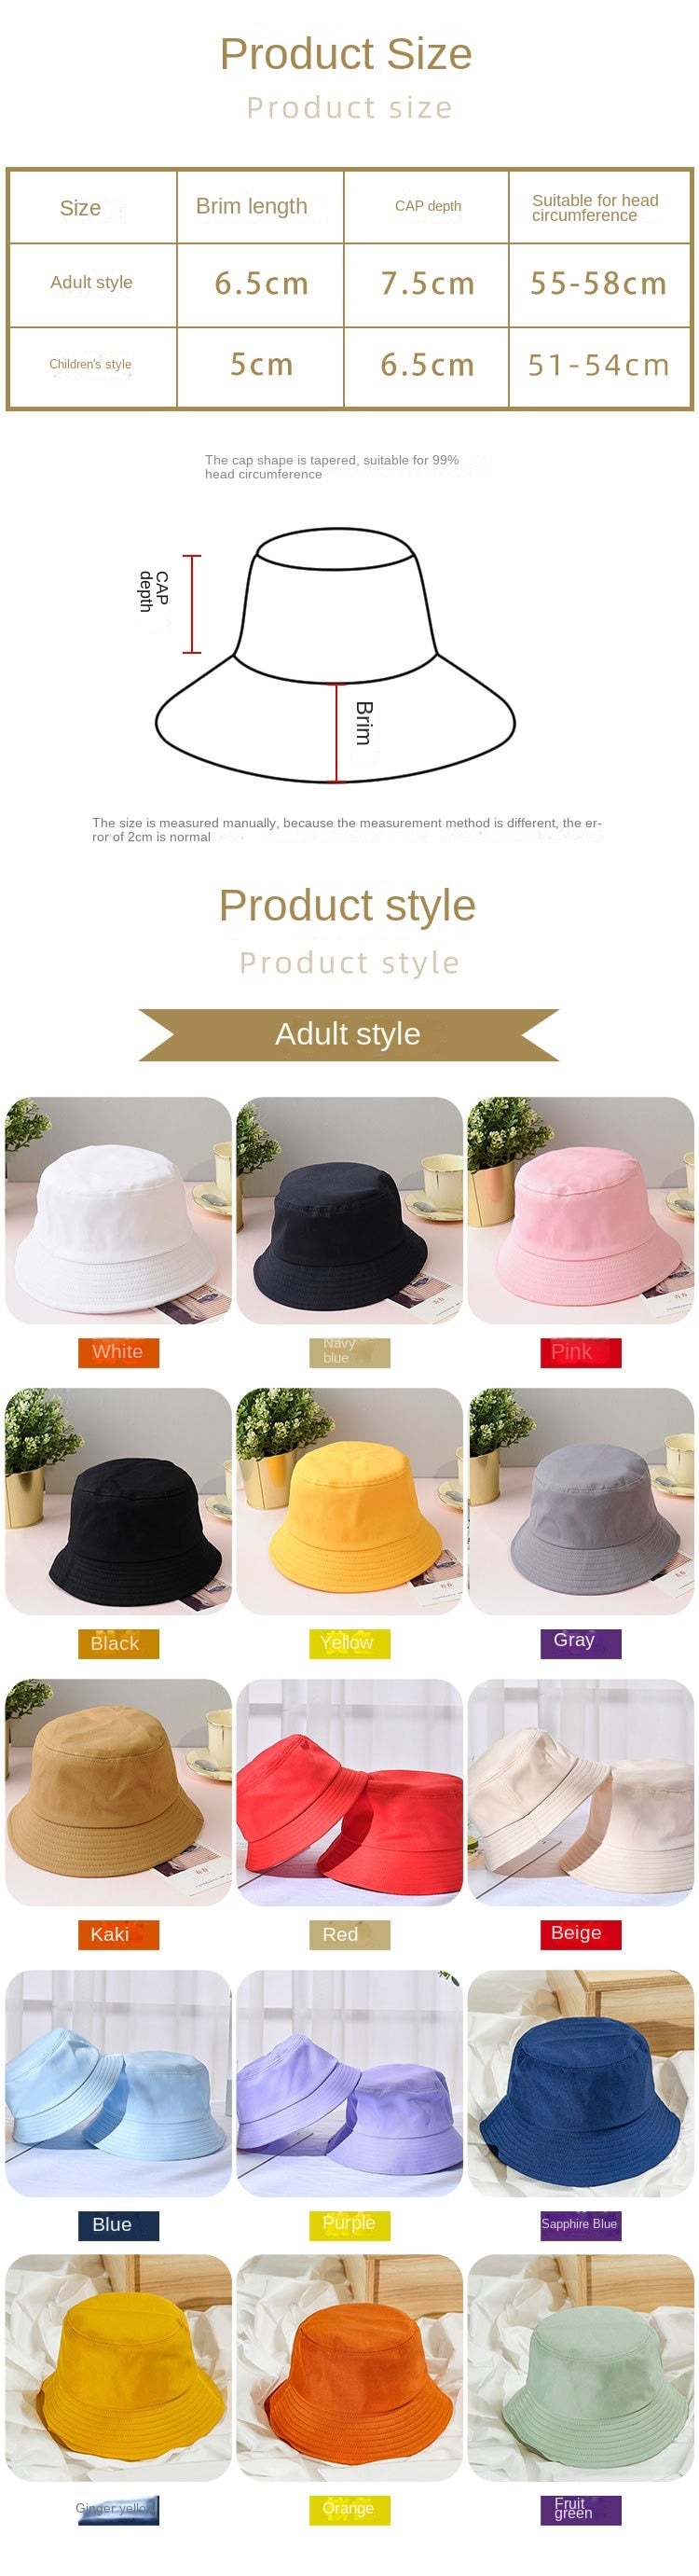 Child and Adult Summer Cotton Bucket Hat | 100% Cotton, Versatile Shade Coverage itsykitschycoo